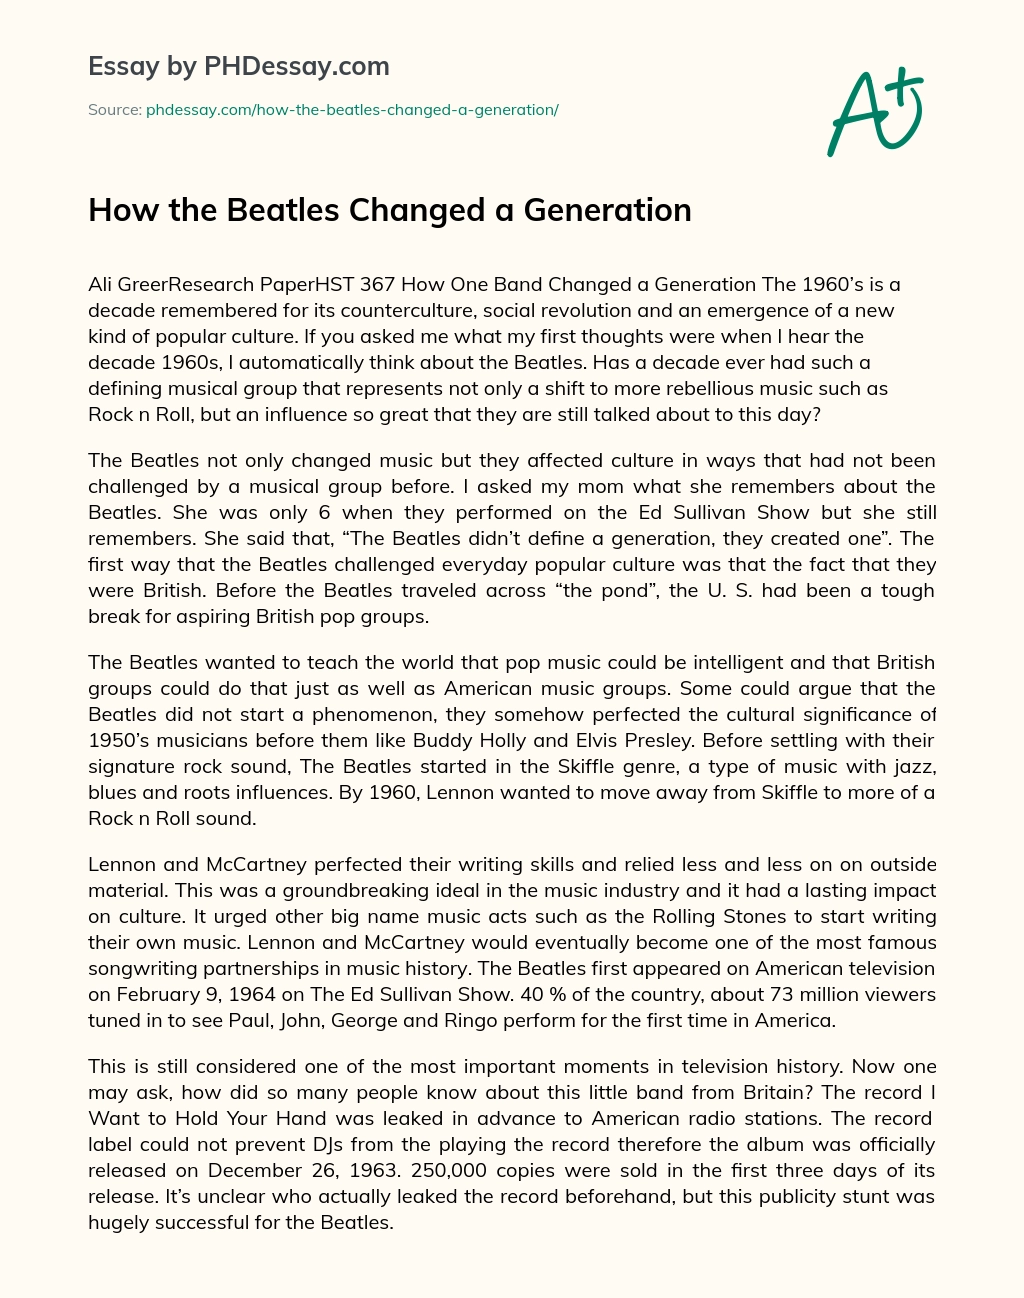 How the Beatles Changed a Generation essay